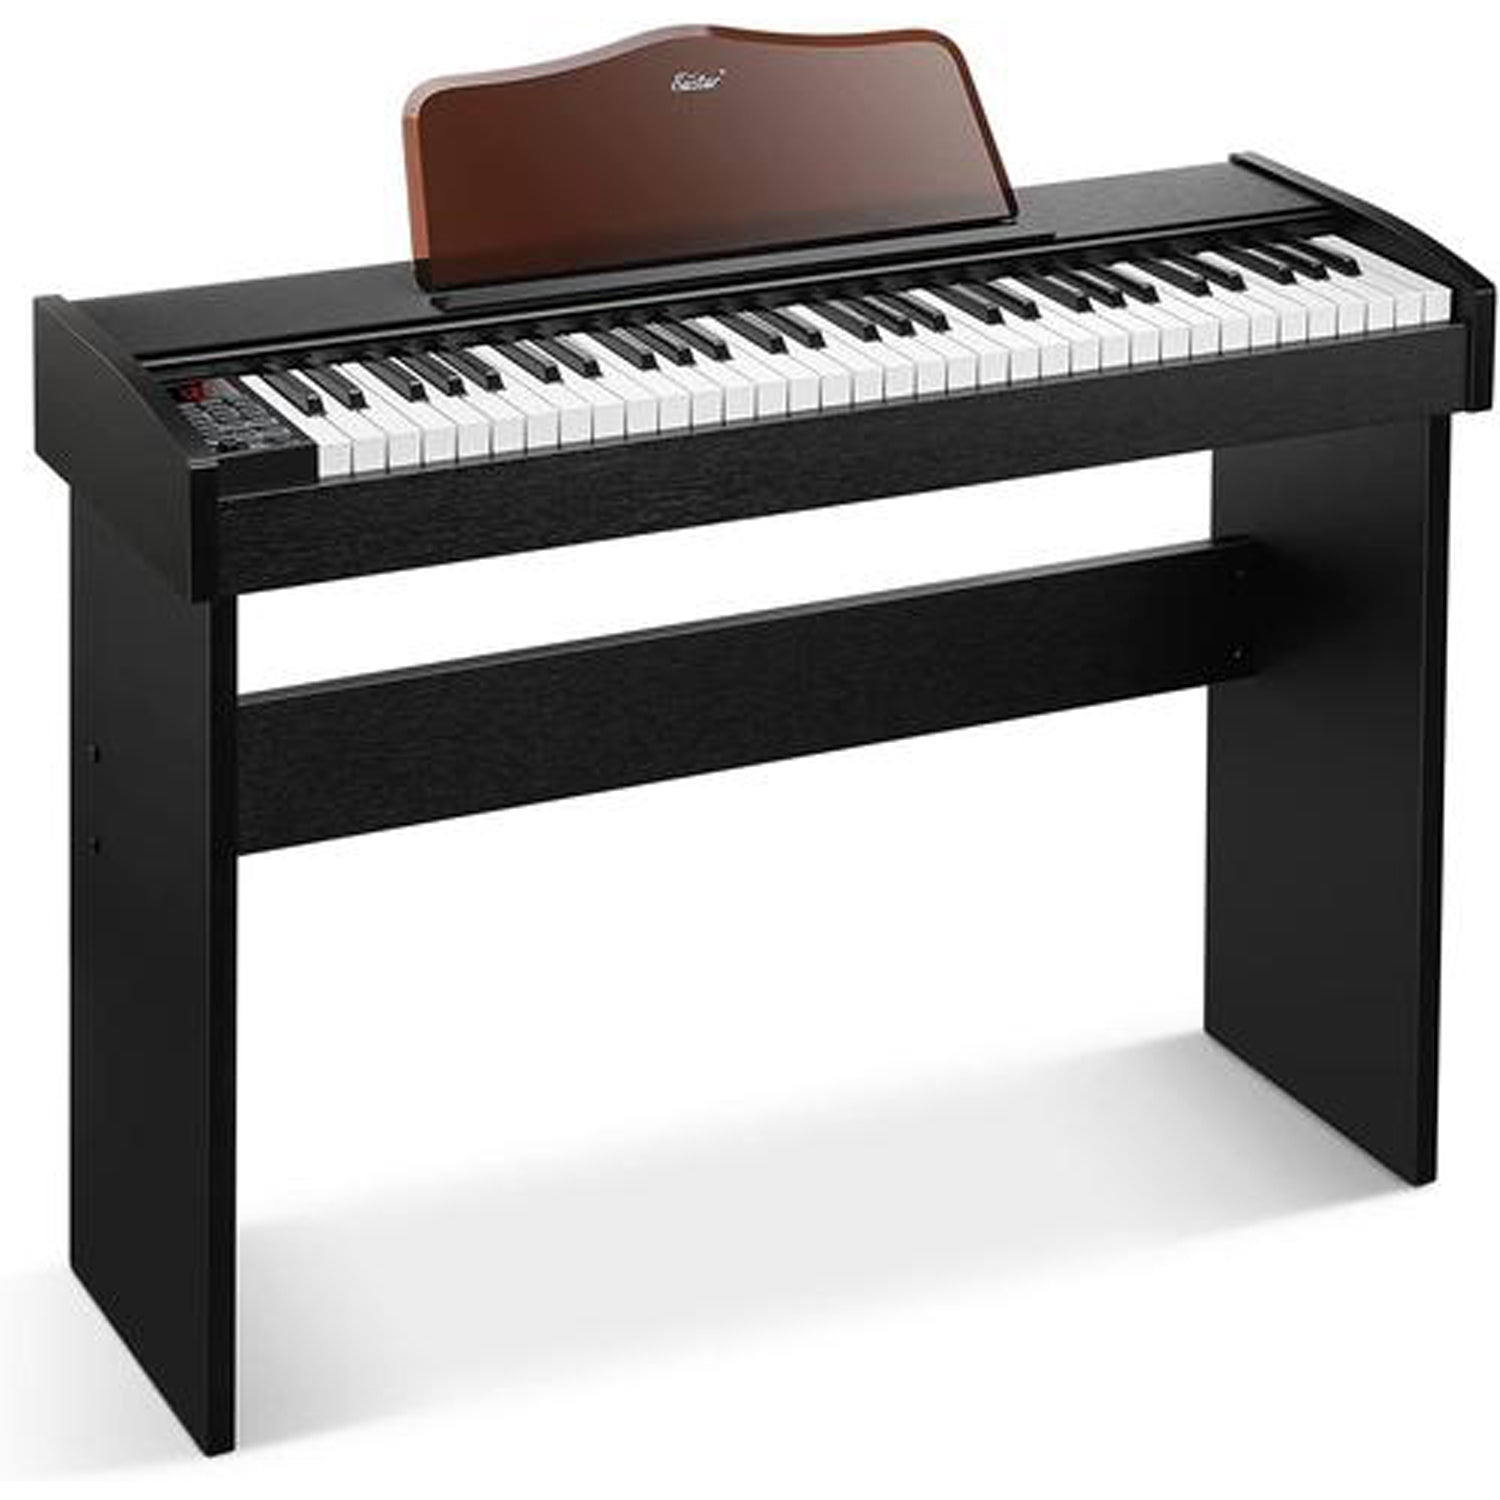 

Eastar EK-10S Detachable Electronic Keyboard Piano for Beginners 61-Key with Classic Wooden Stand